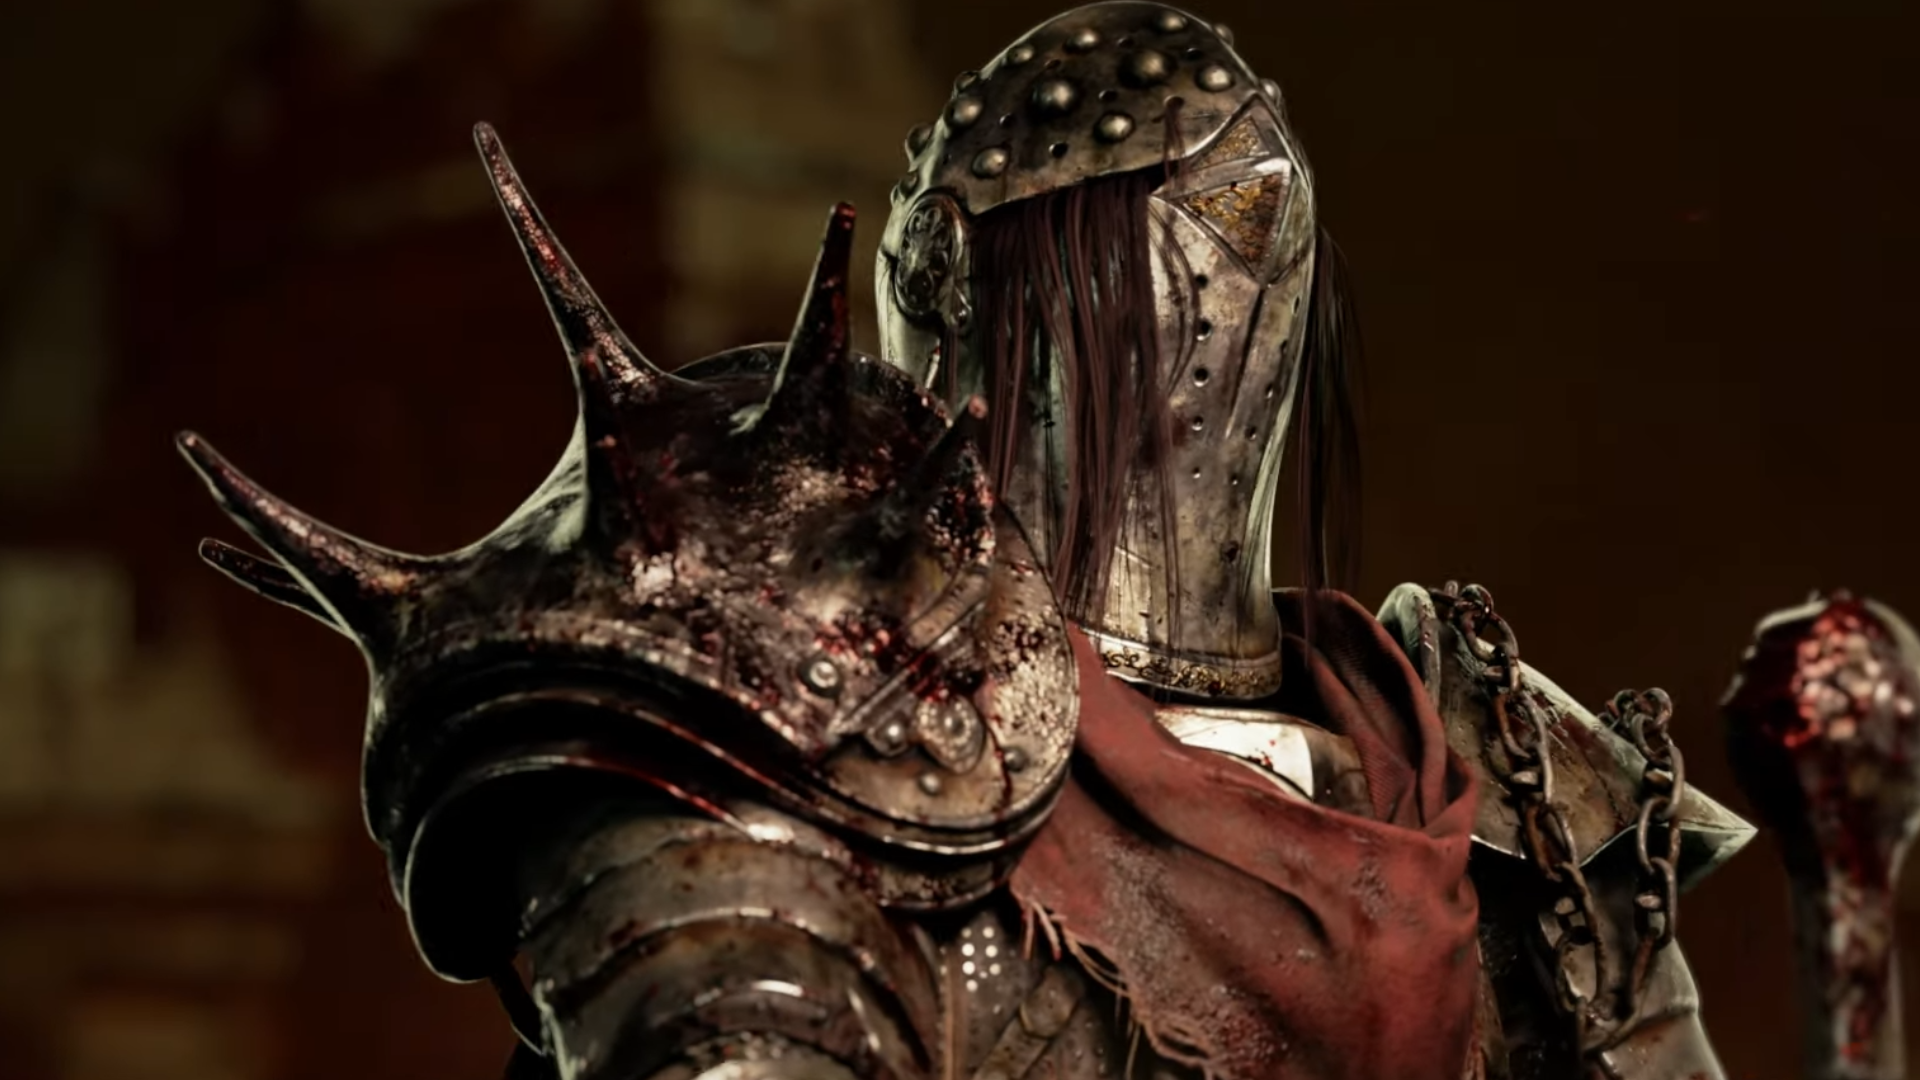 The Knight close up from Dead by Daylight